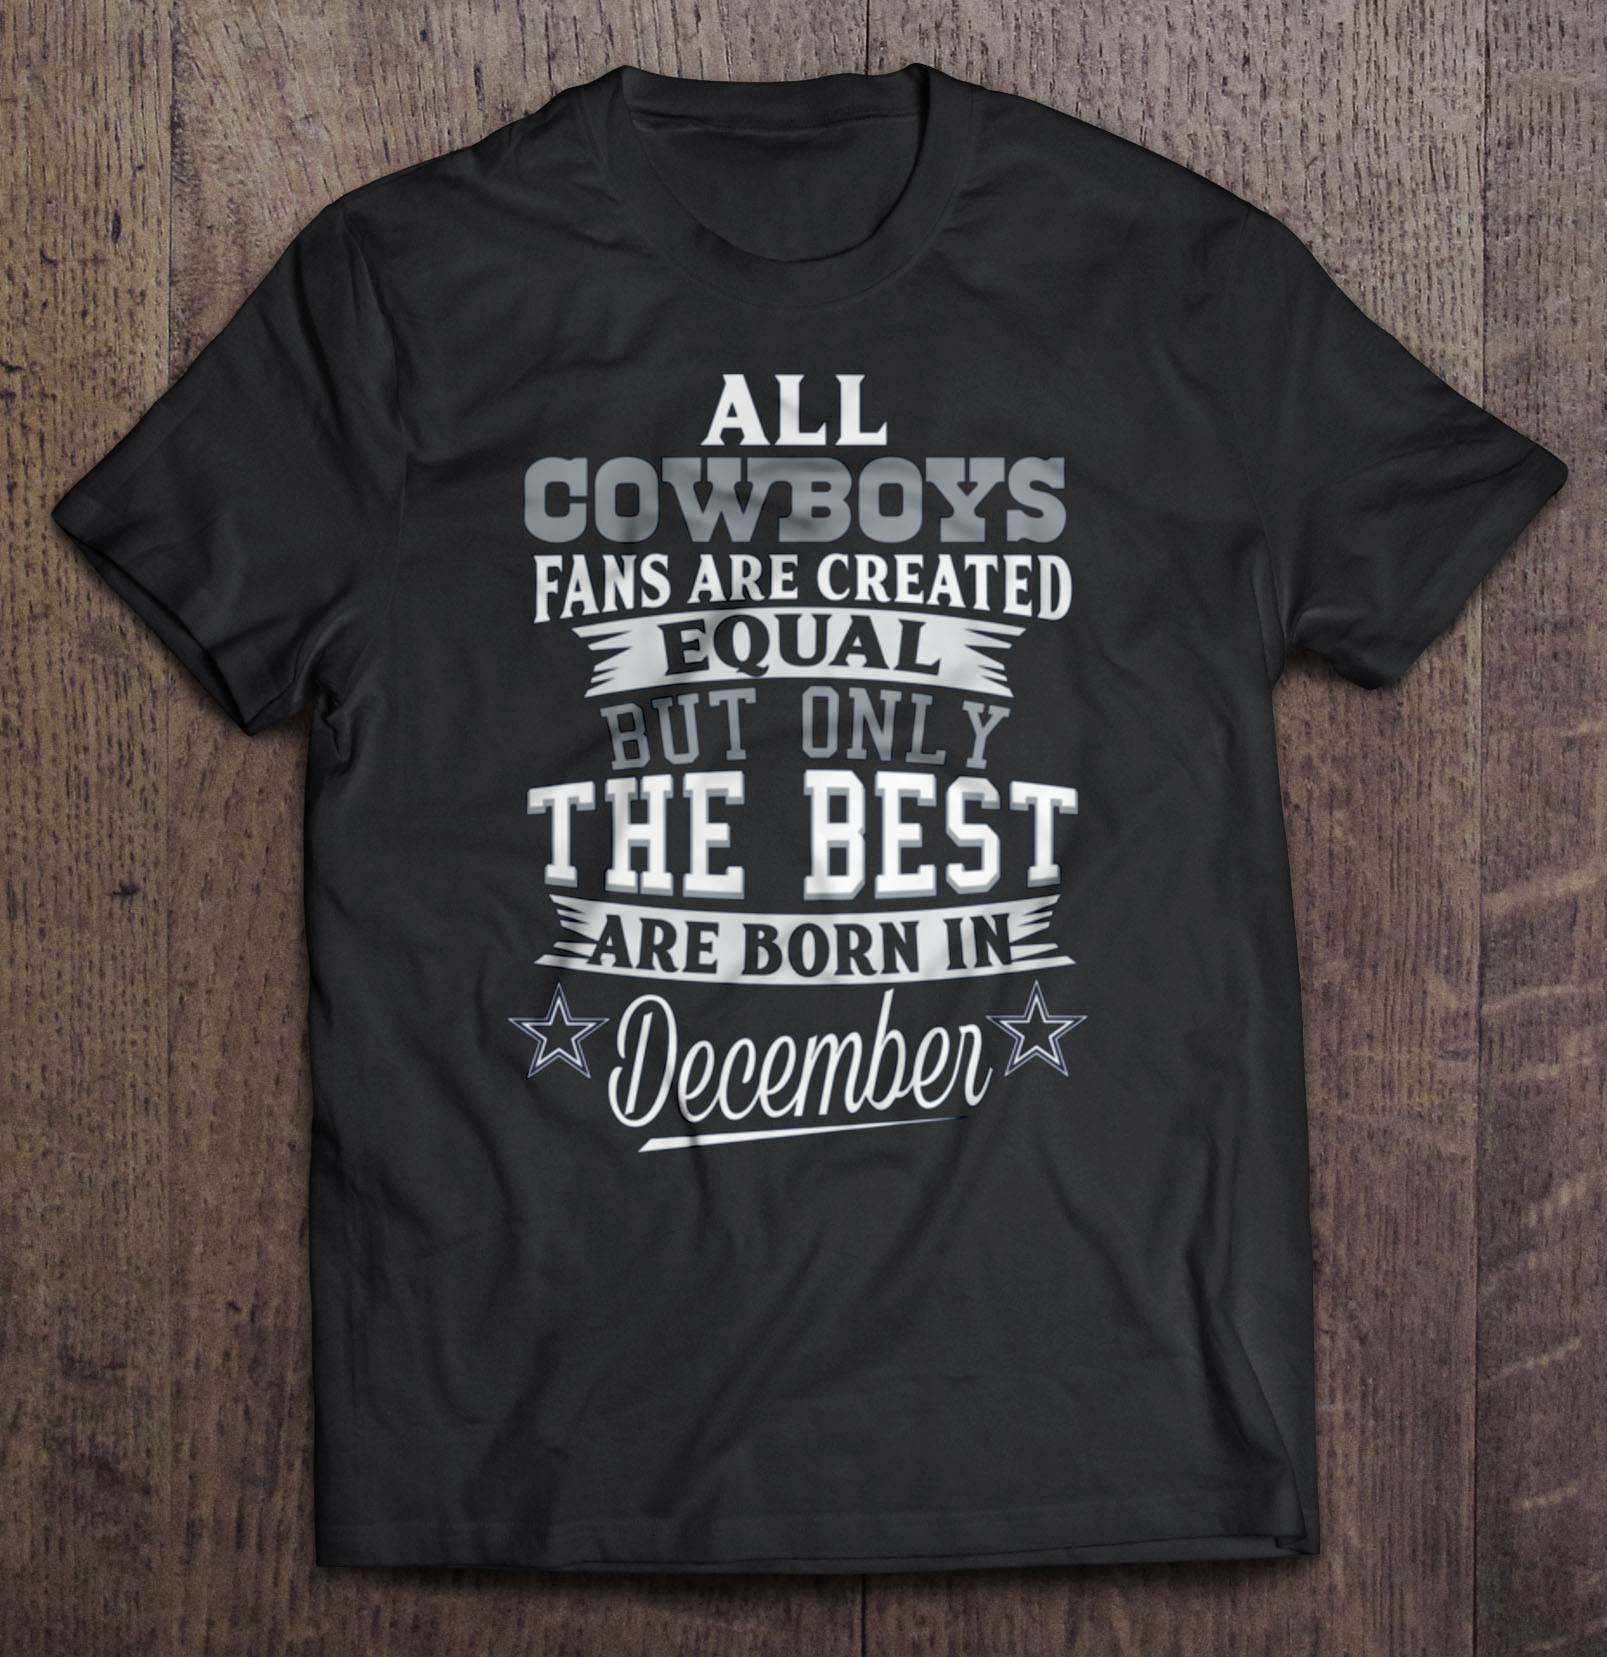 Dallas Cowboys All Cowboys Fans Are Created Equal But Only The Best Are Born In December